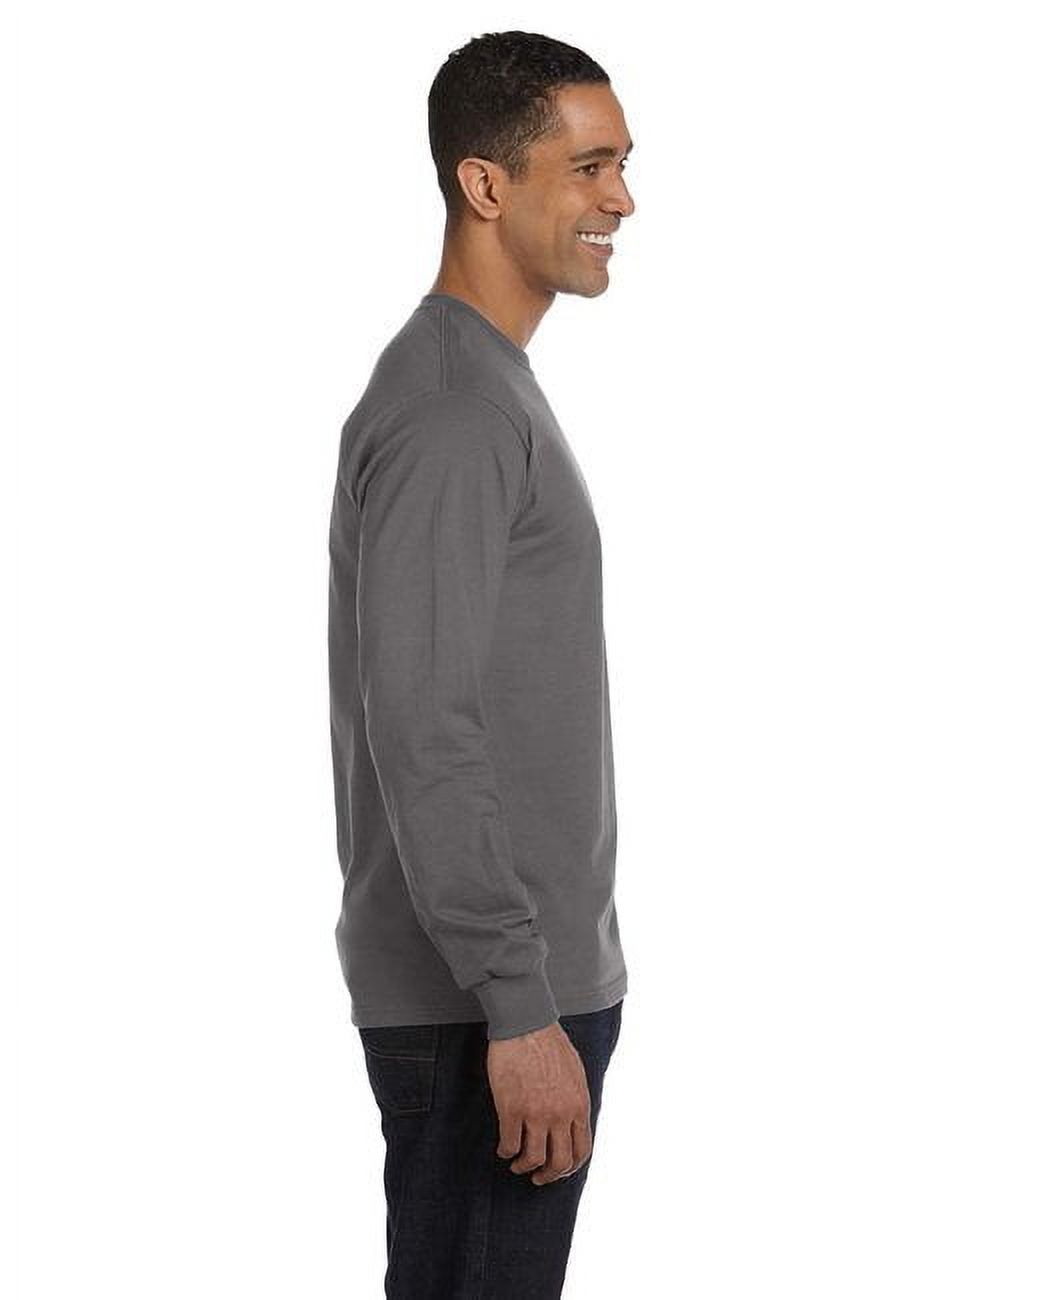 Hanes Men's and Big Men's Premium Beefy-T Long Sleeve T-Shirt, Up To 3XL - image 3 of 3